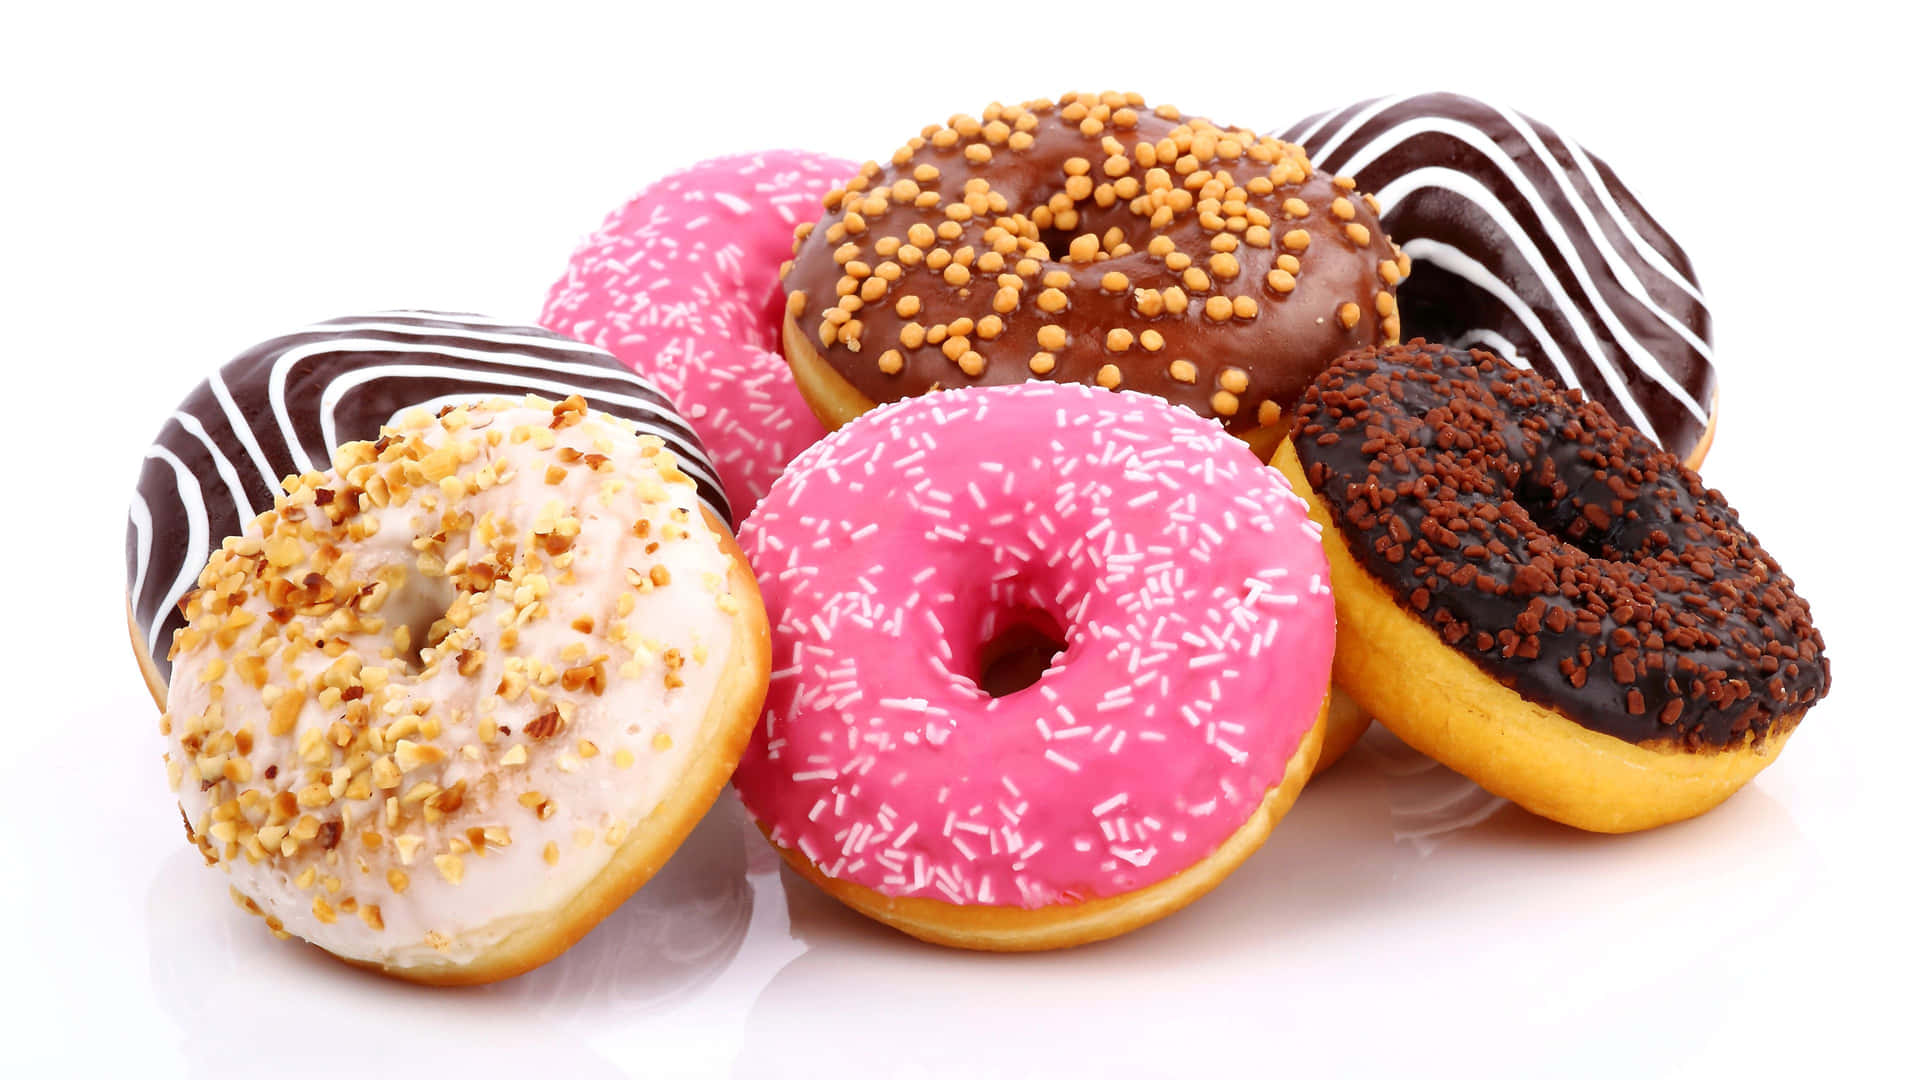 Iniziail Weekend Con Dunkin Donuts!